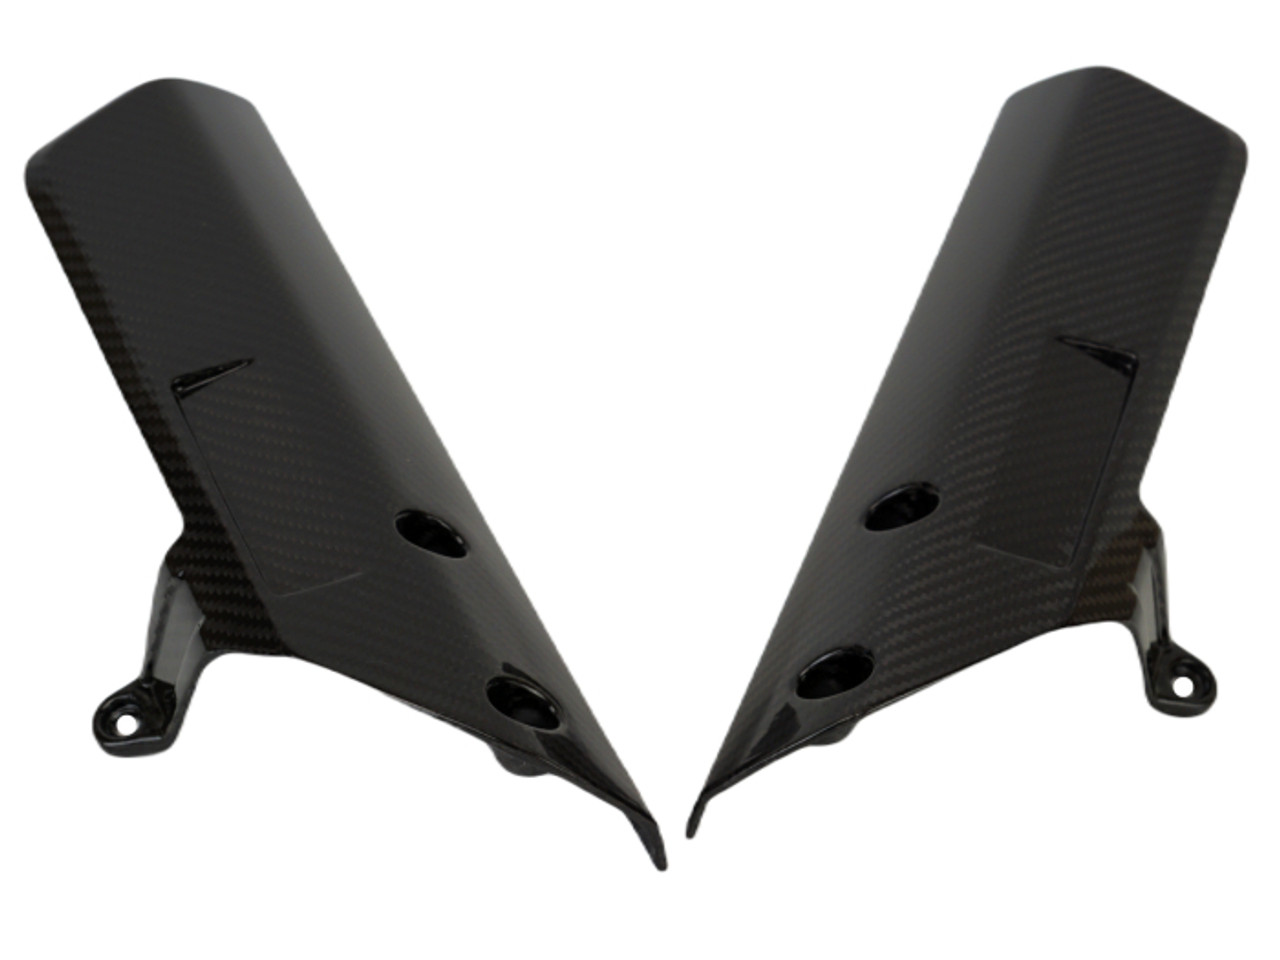 Fork Sides in Glossy Twill Weave Carbon Fiber for KTM 790/890 Adventure R, Rally